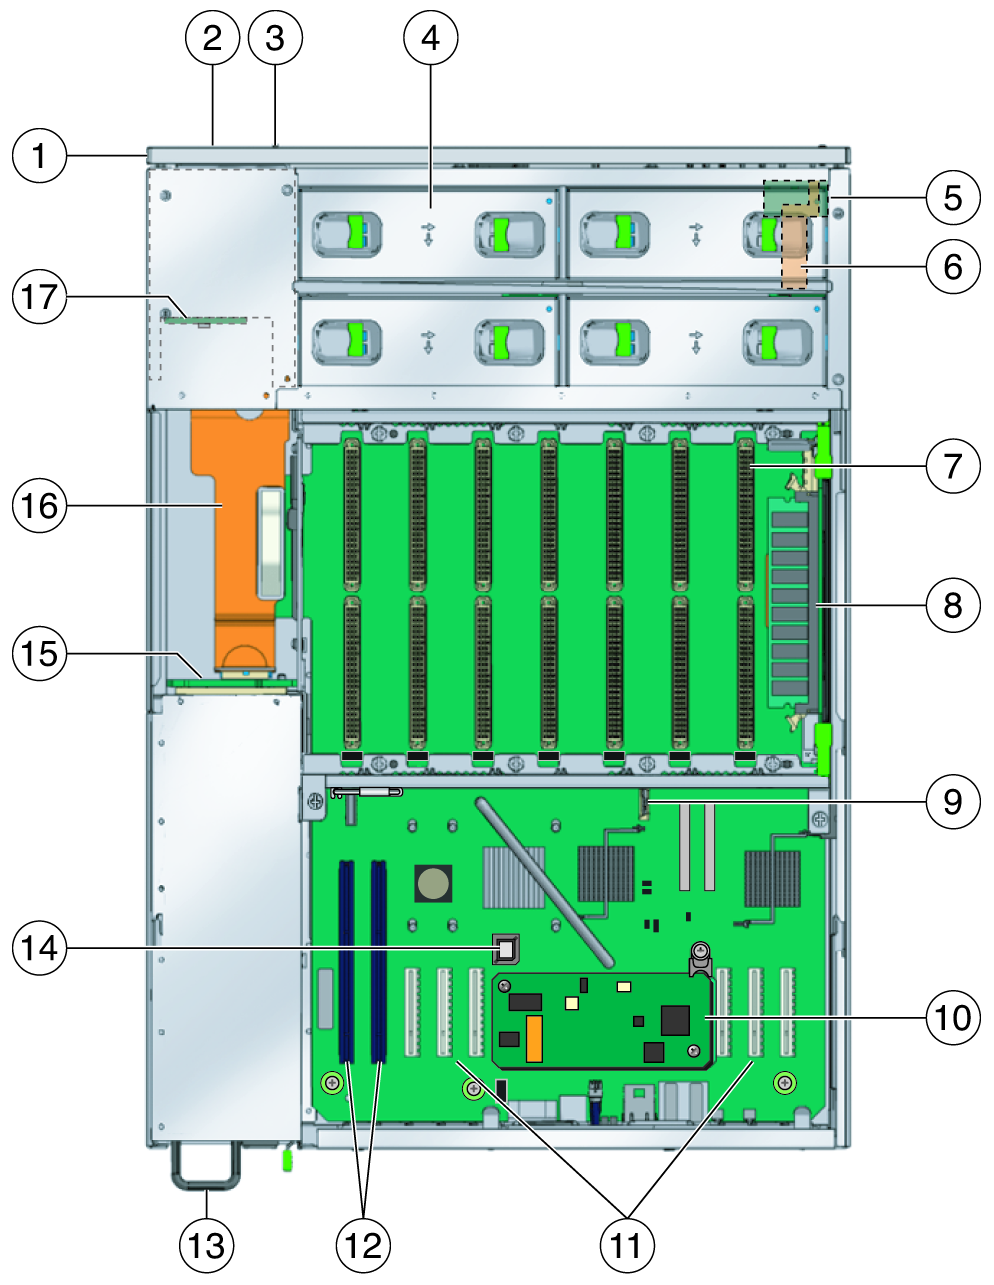 image:An illustration with callouts that shows the location of the server's replaceable components.